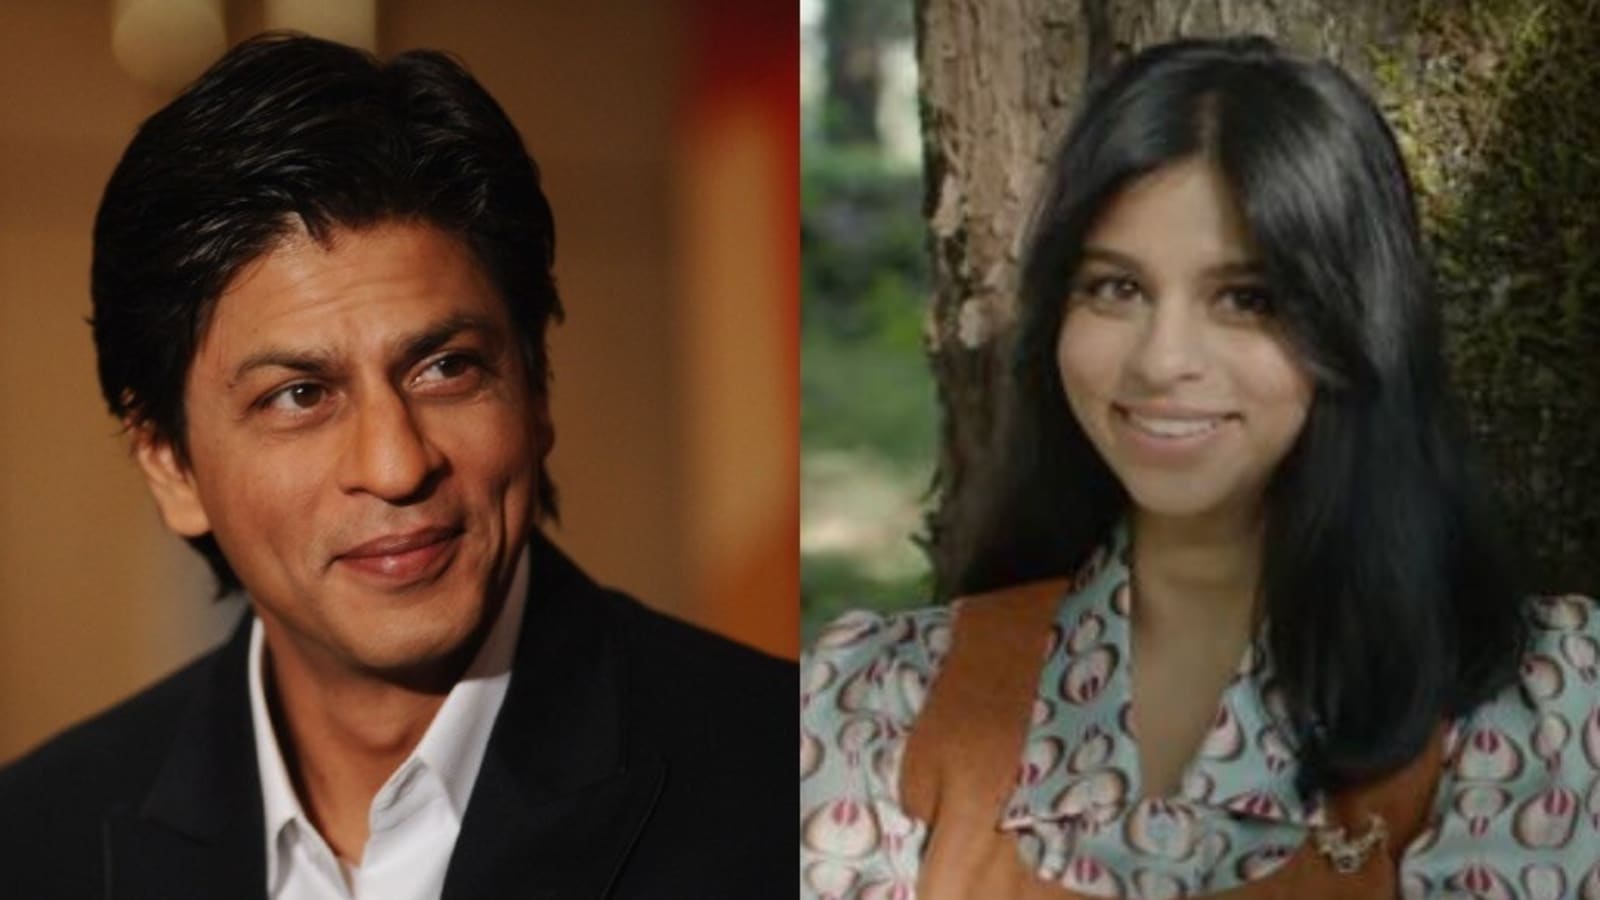 Shah Rukh Khan tells Suhana Khan to take day off from Archies shoot, give him a hug, she says ‘I’m a working actor now’